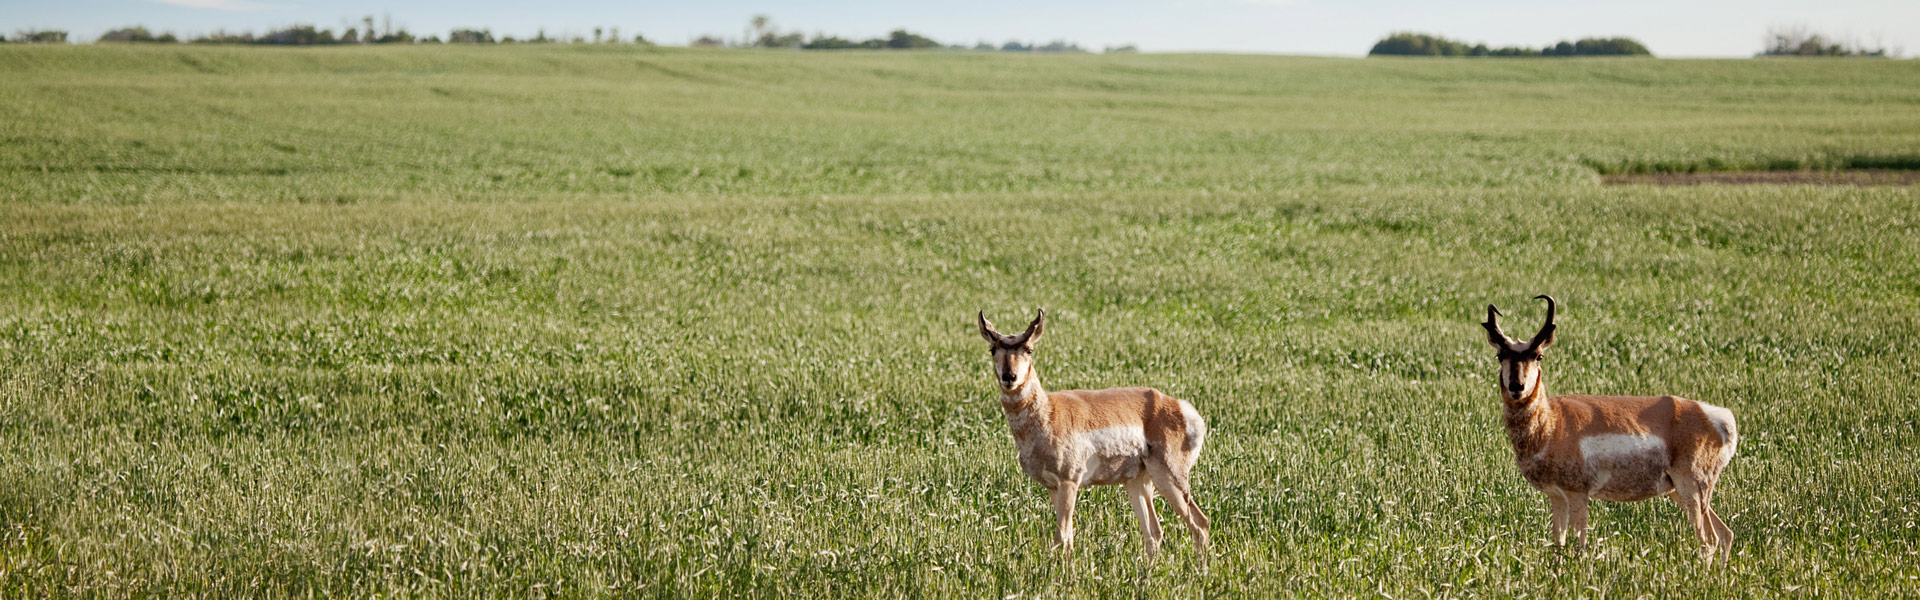 Two antelope in a field